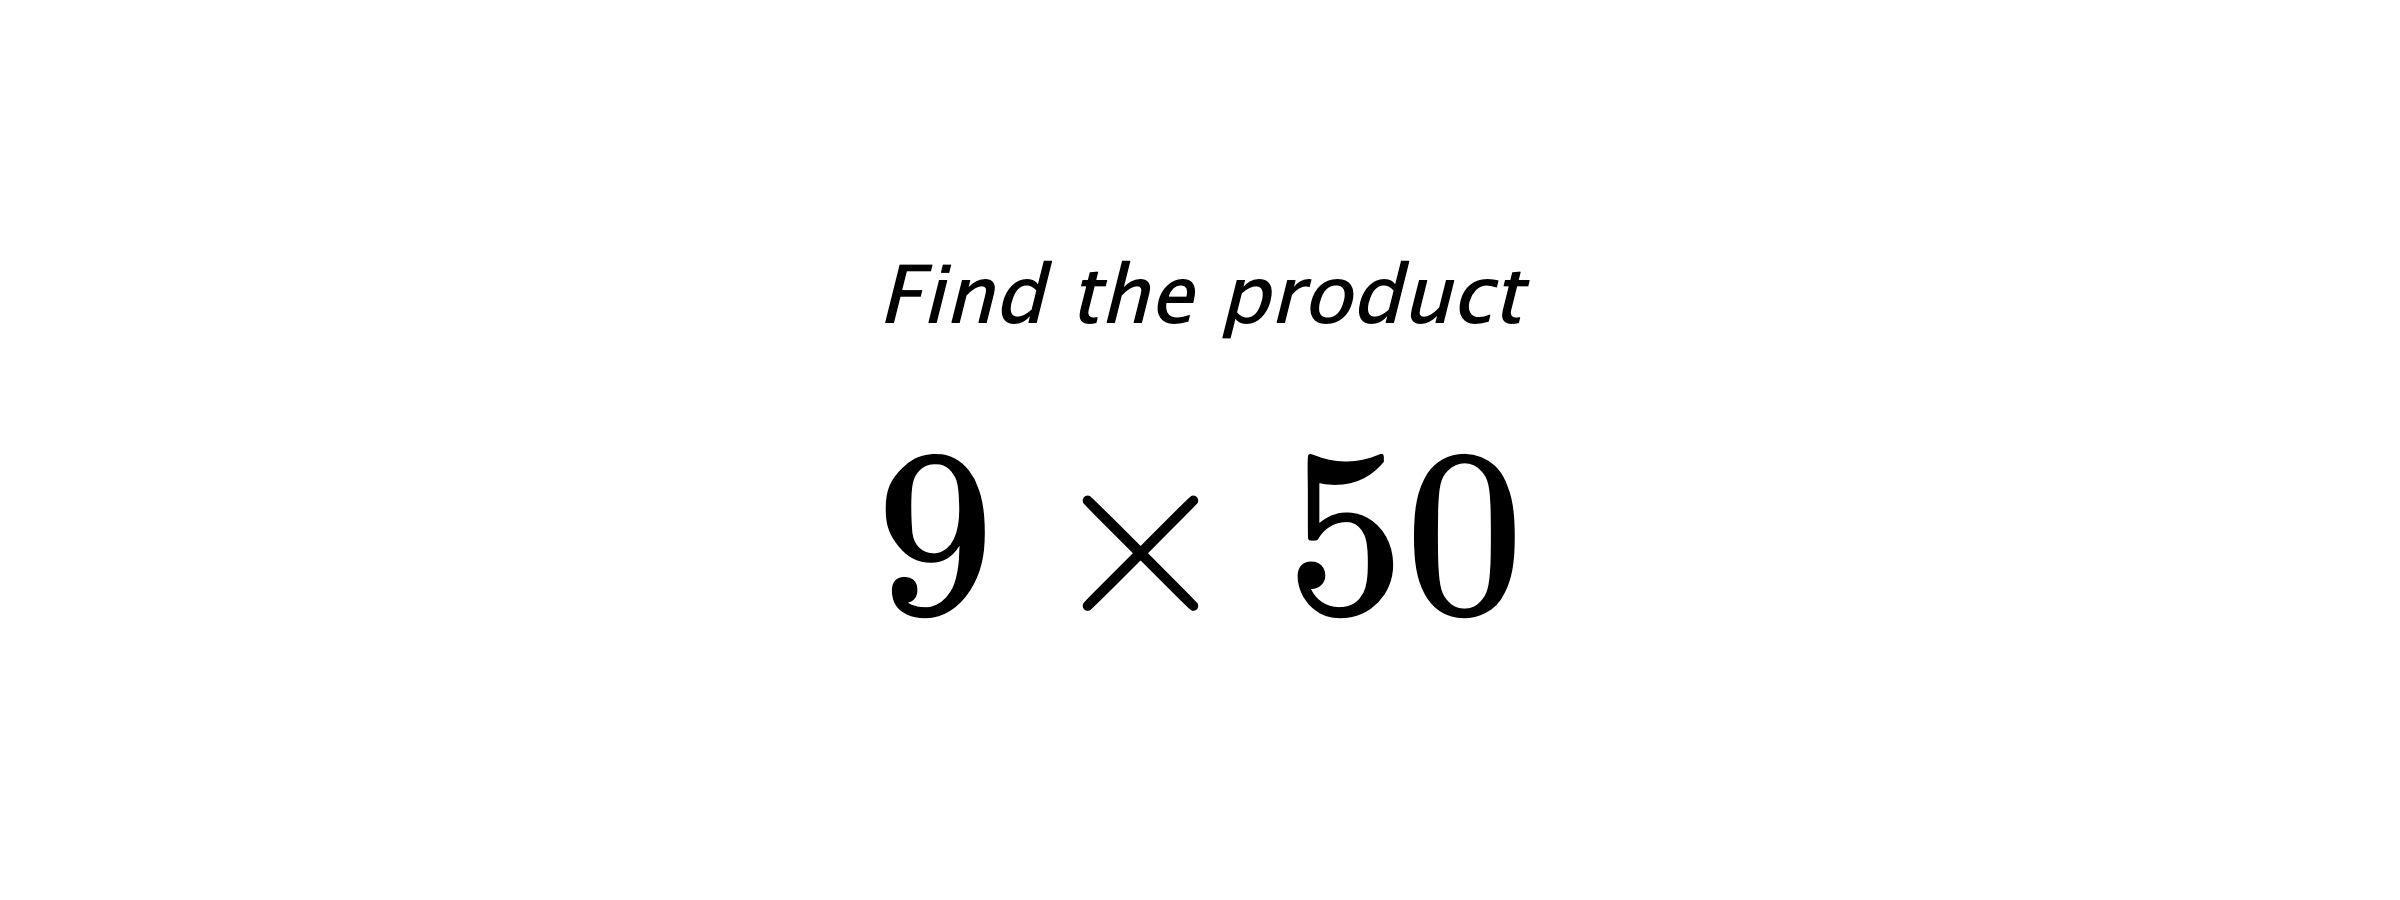 Find the product $ 9 \times 50 $